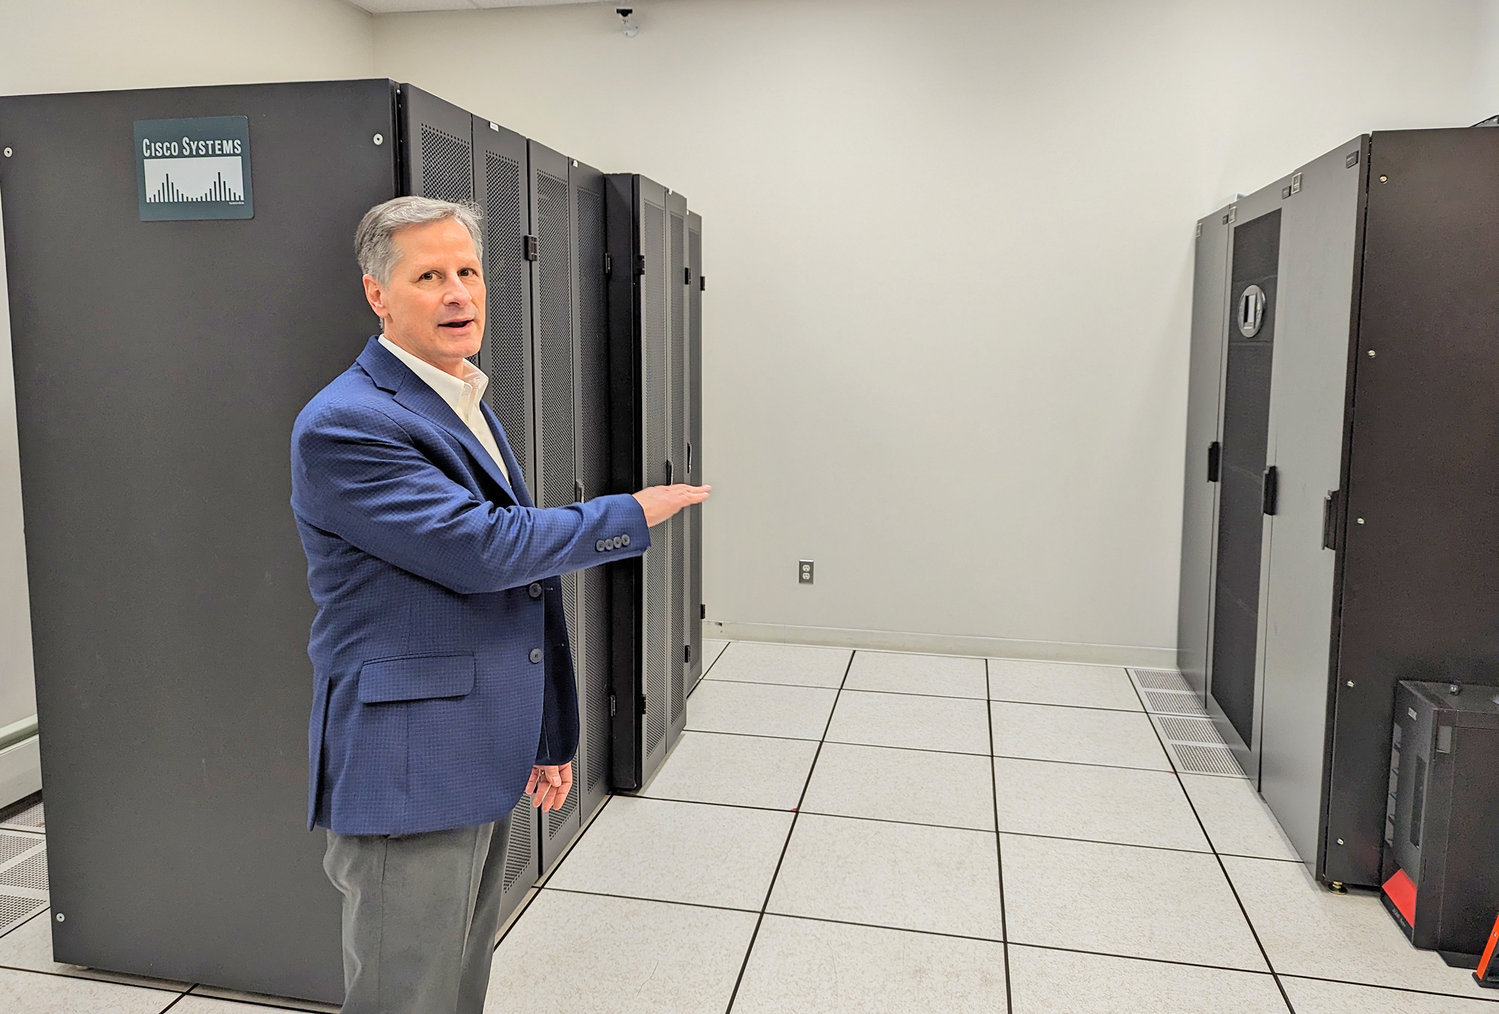 Michael Polce, owner and CEO of M.A. Polce Consulting, shows off his in-house servers and computer power at his office at the Griffiss and Business Technology Park in Rome.